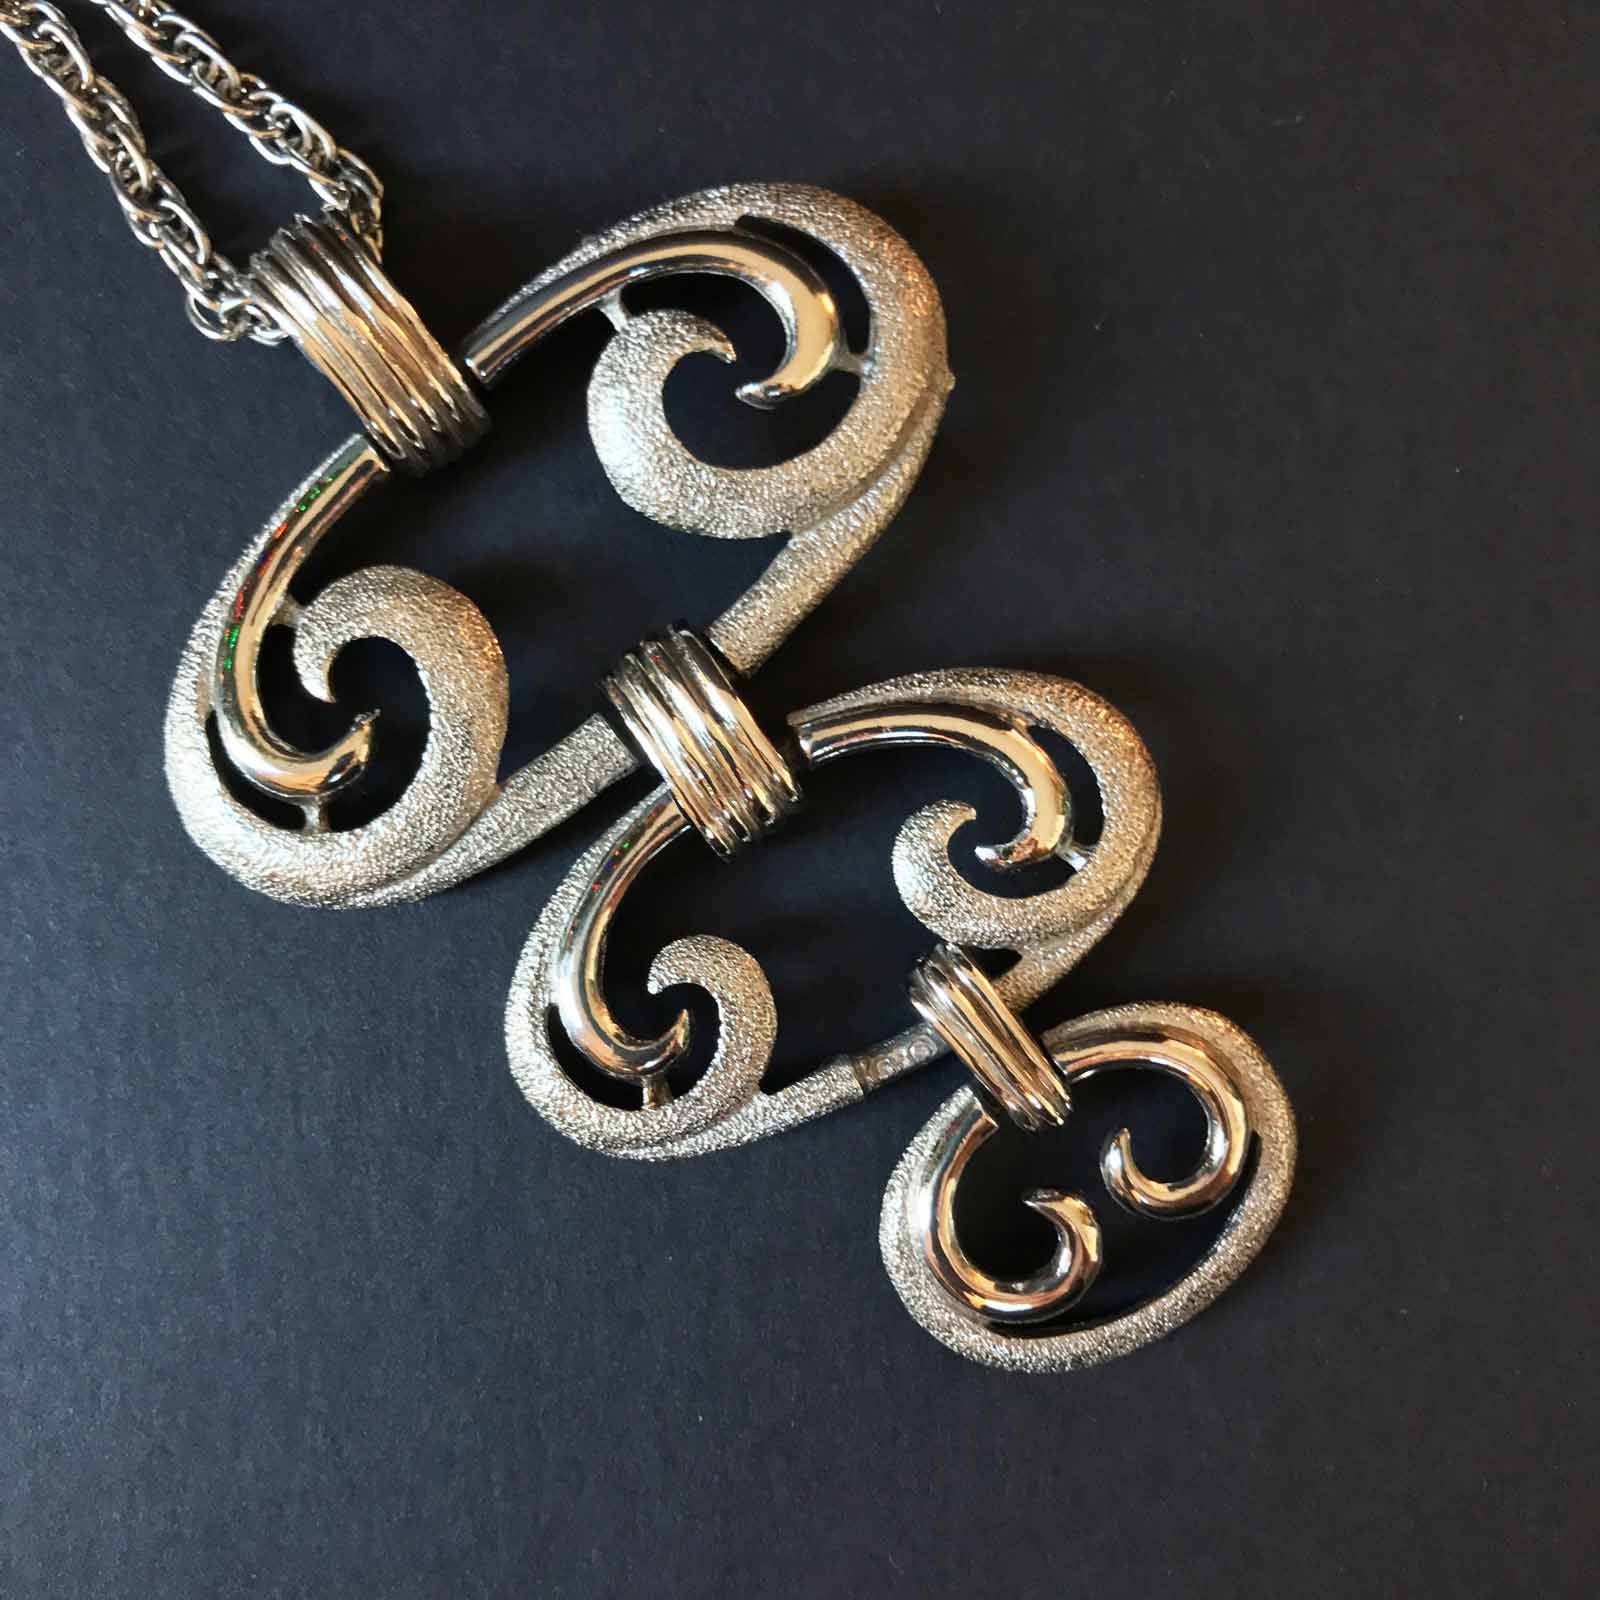 Tiered Scroll Design Mod Pendant Necklace Statement Piece - Etsy